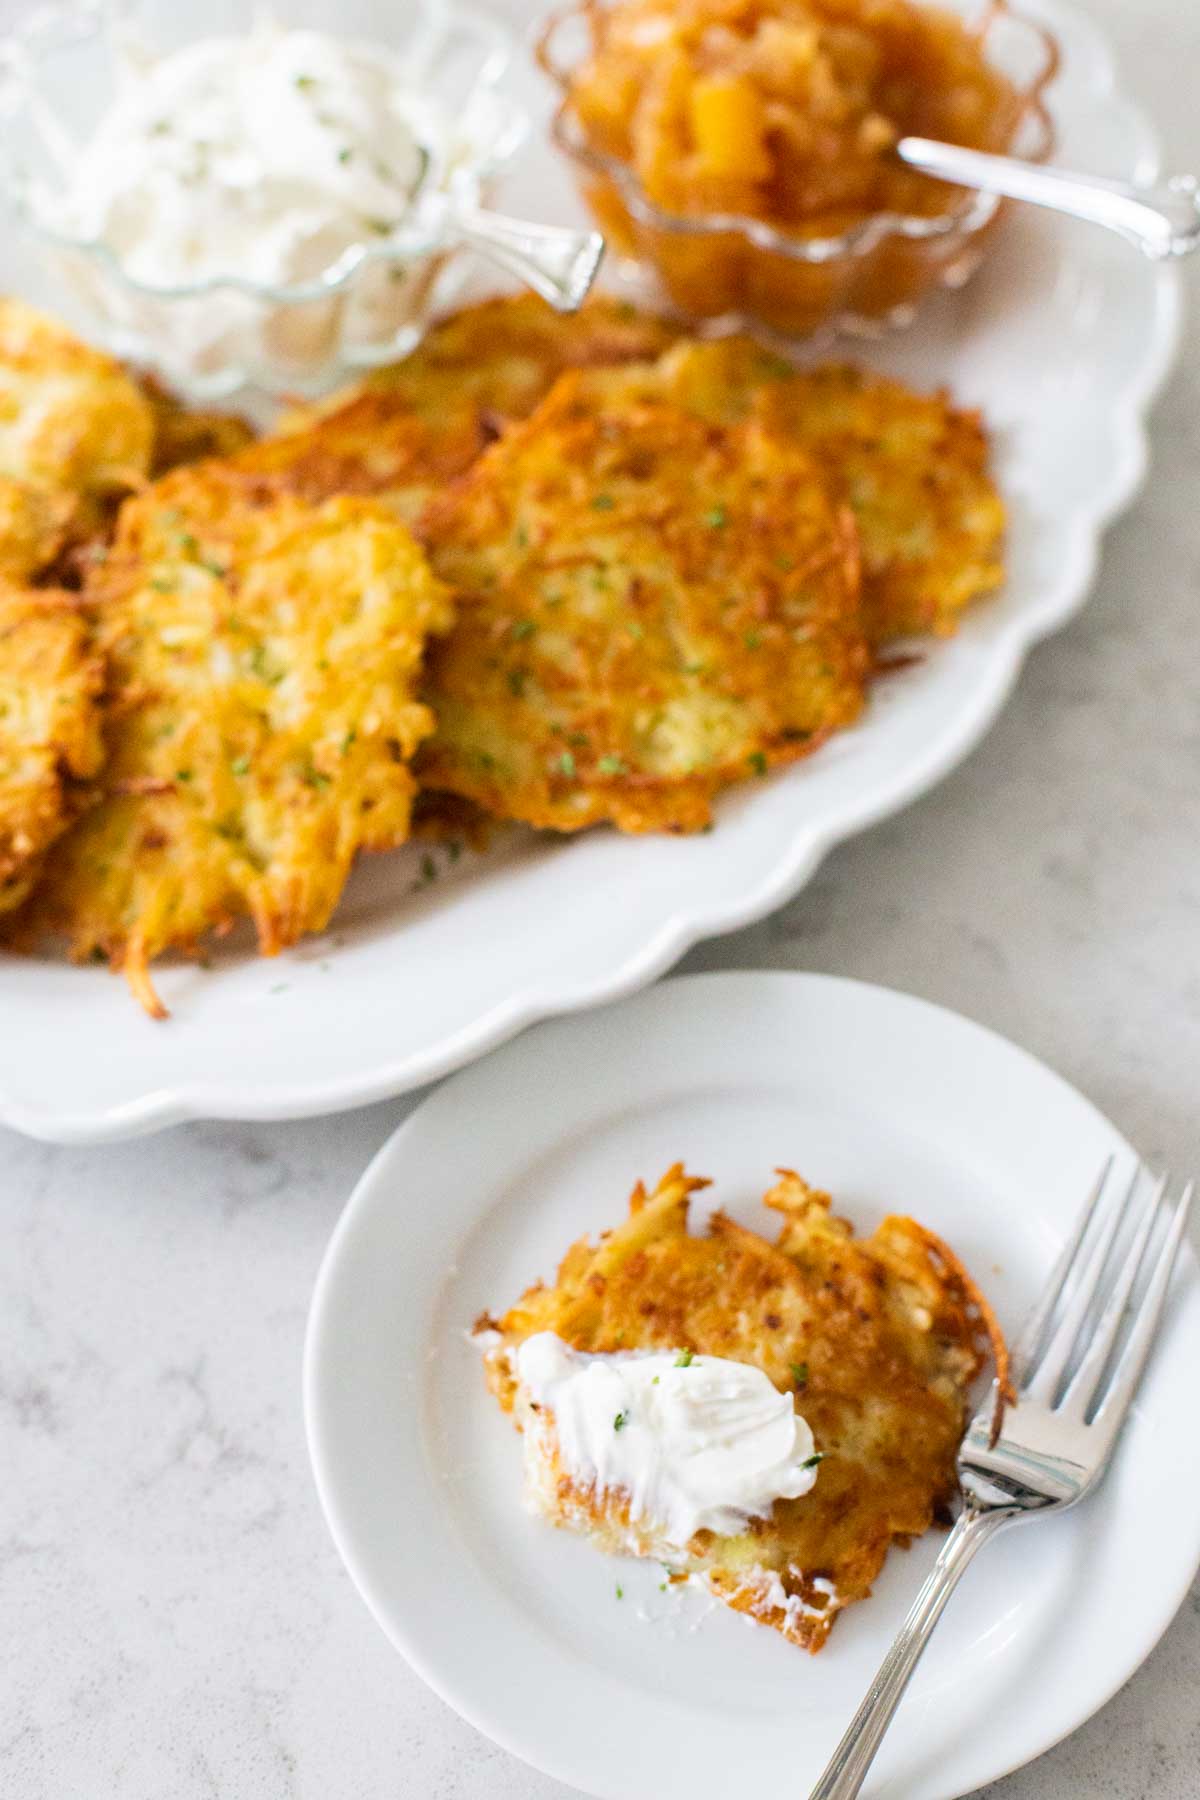 A serving of potato pancakes with sour cream and a fork.